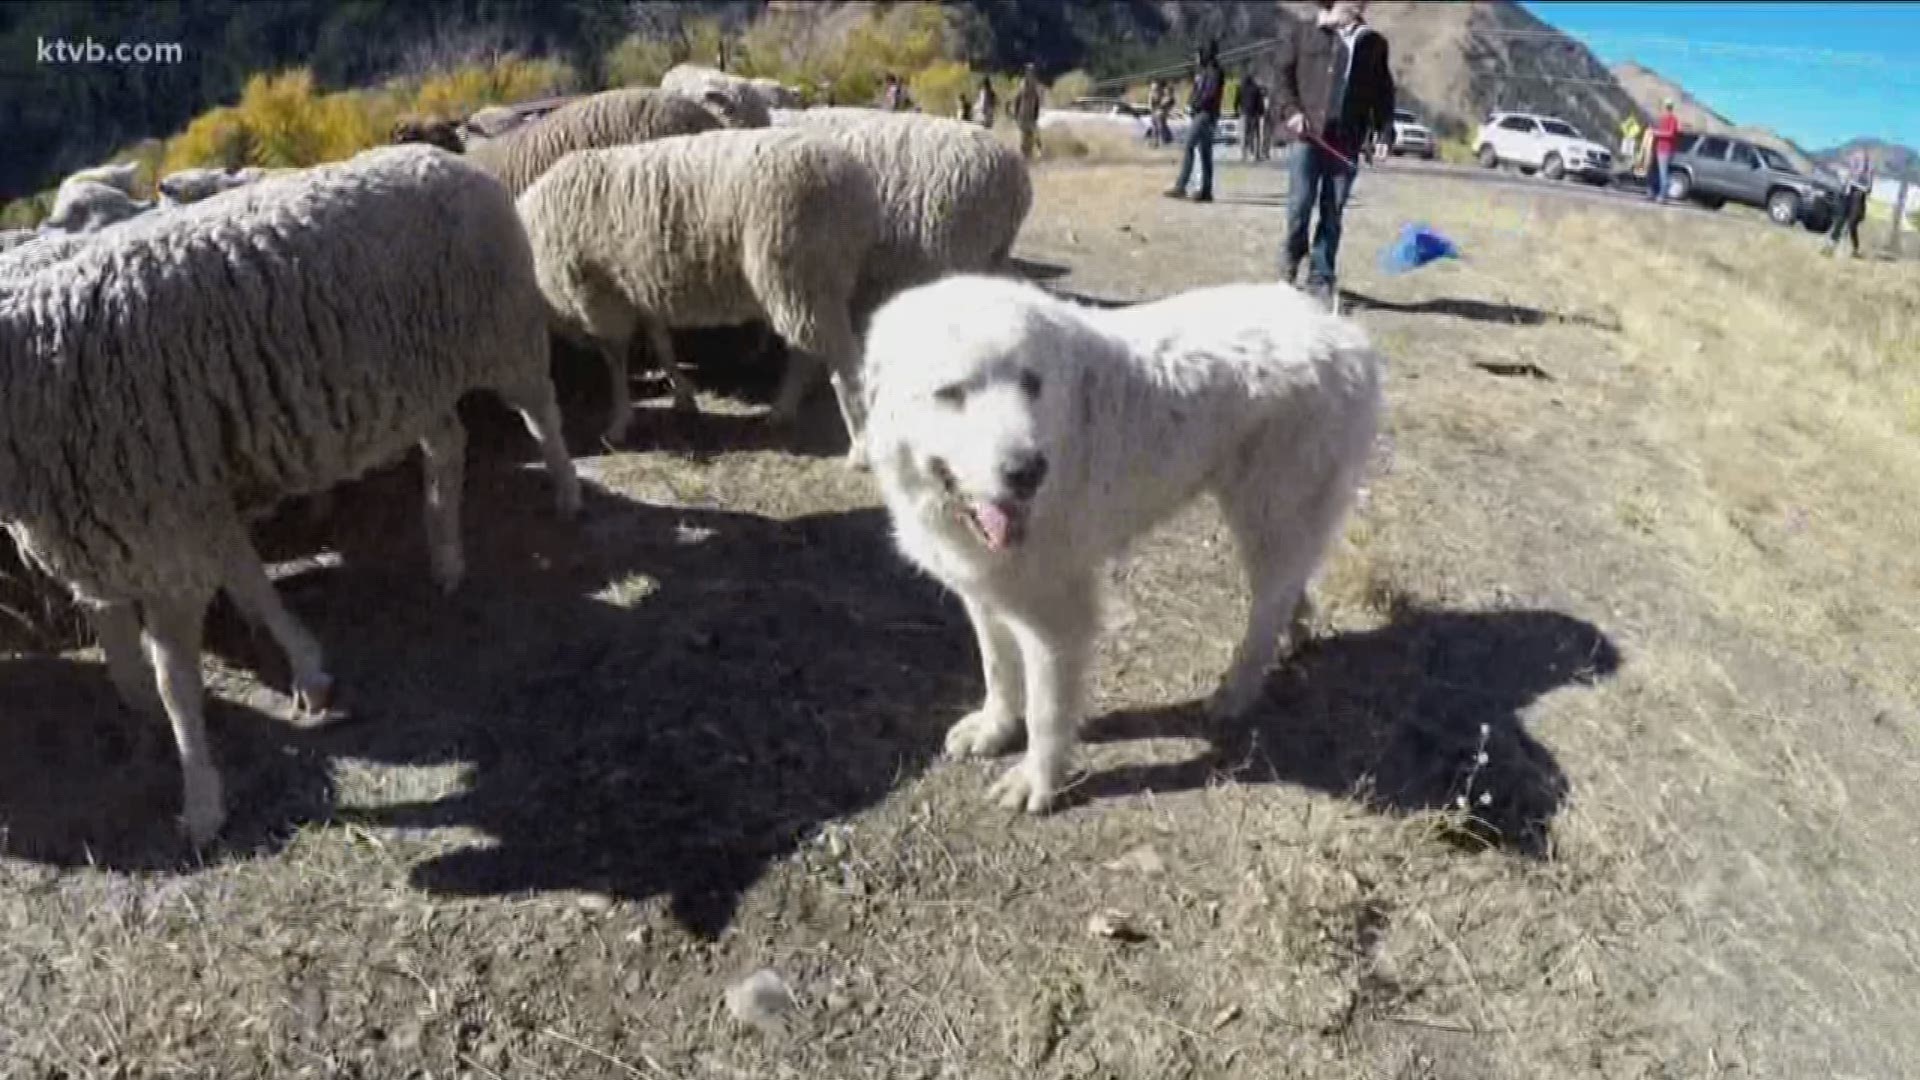 Moving a whole flock of sheep through downtown Ketchum should be the easy part of these dogs' jobs, but dealing with wolves and keeping the sheep together through their migration is the intense part of it.